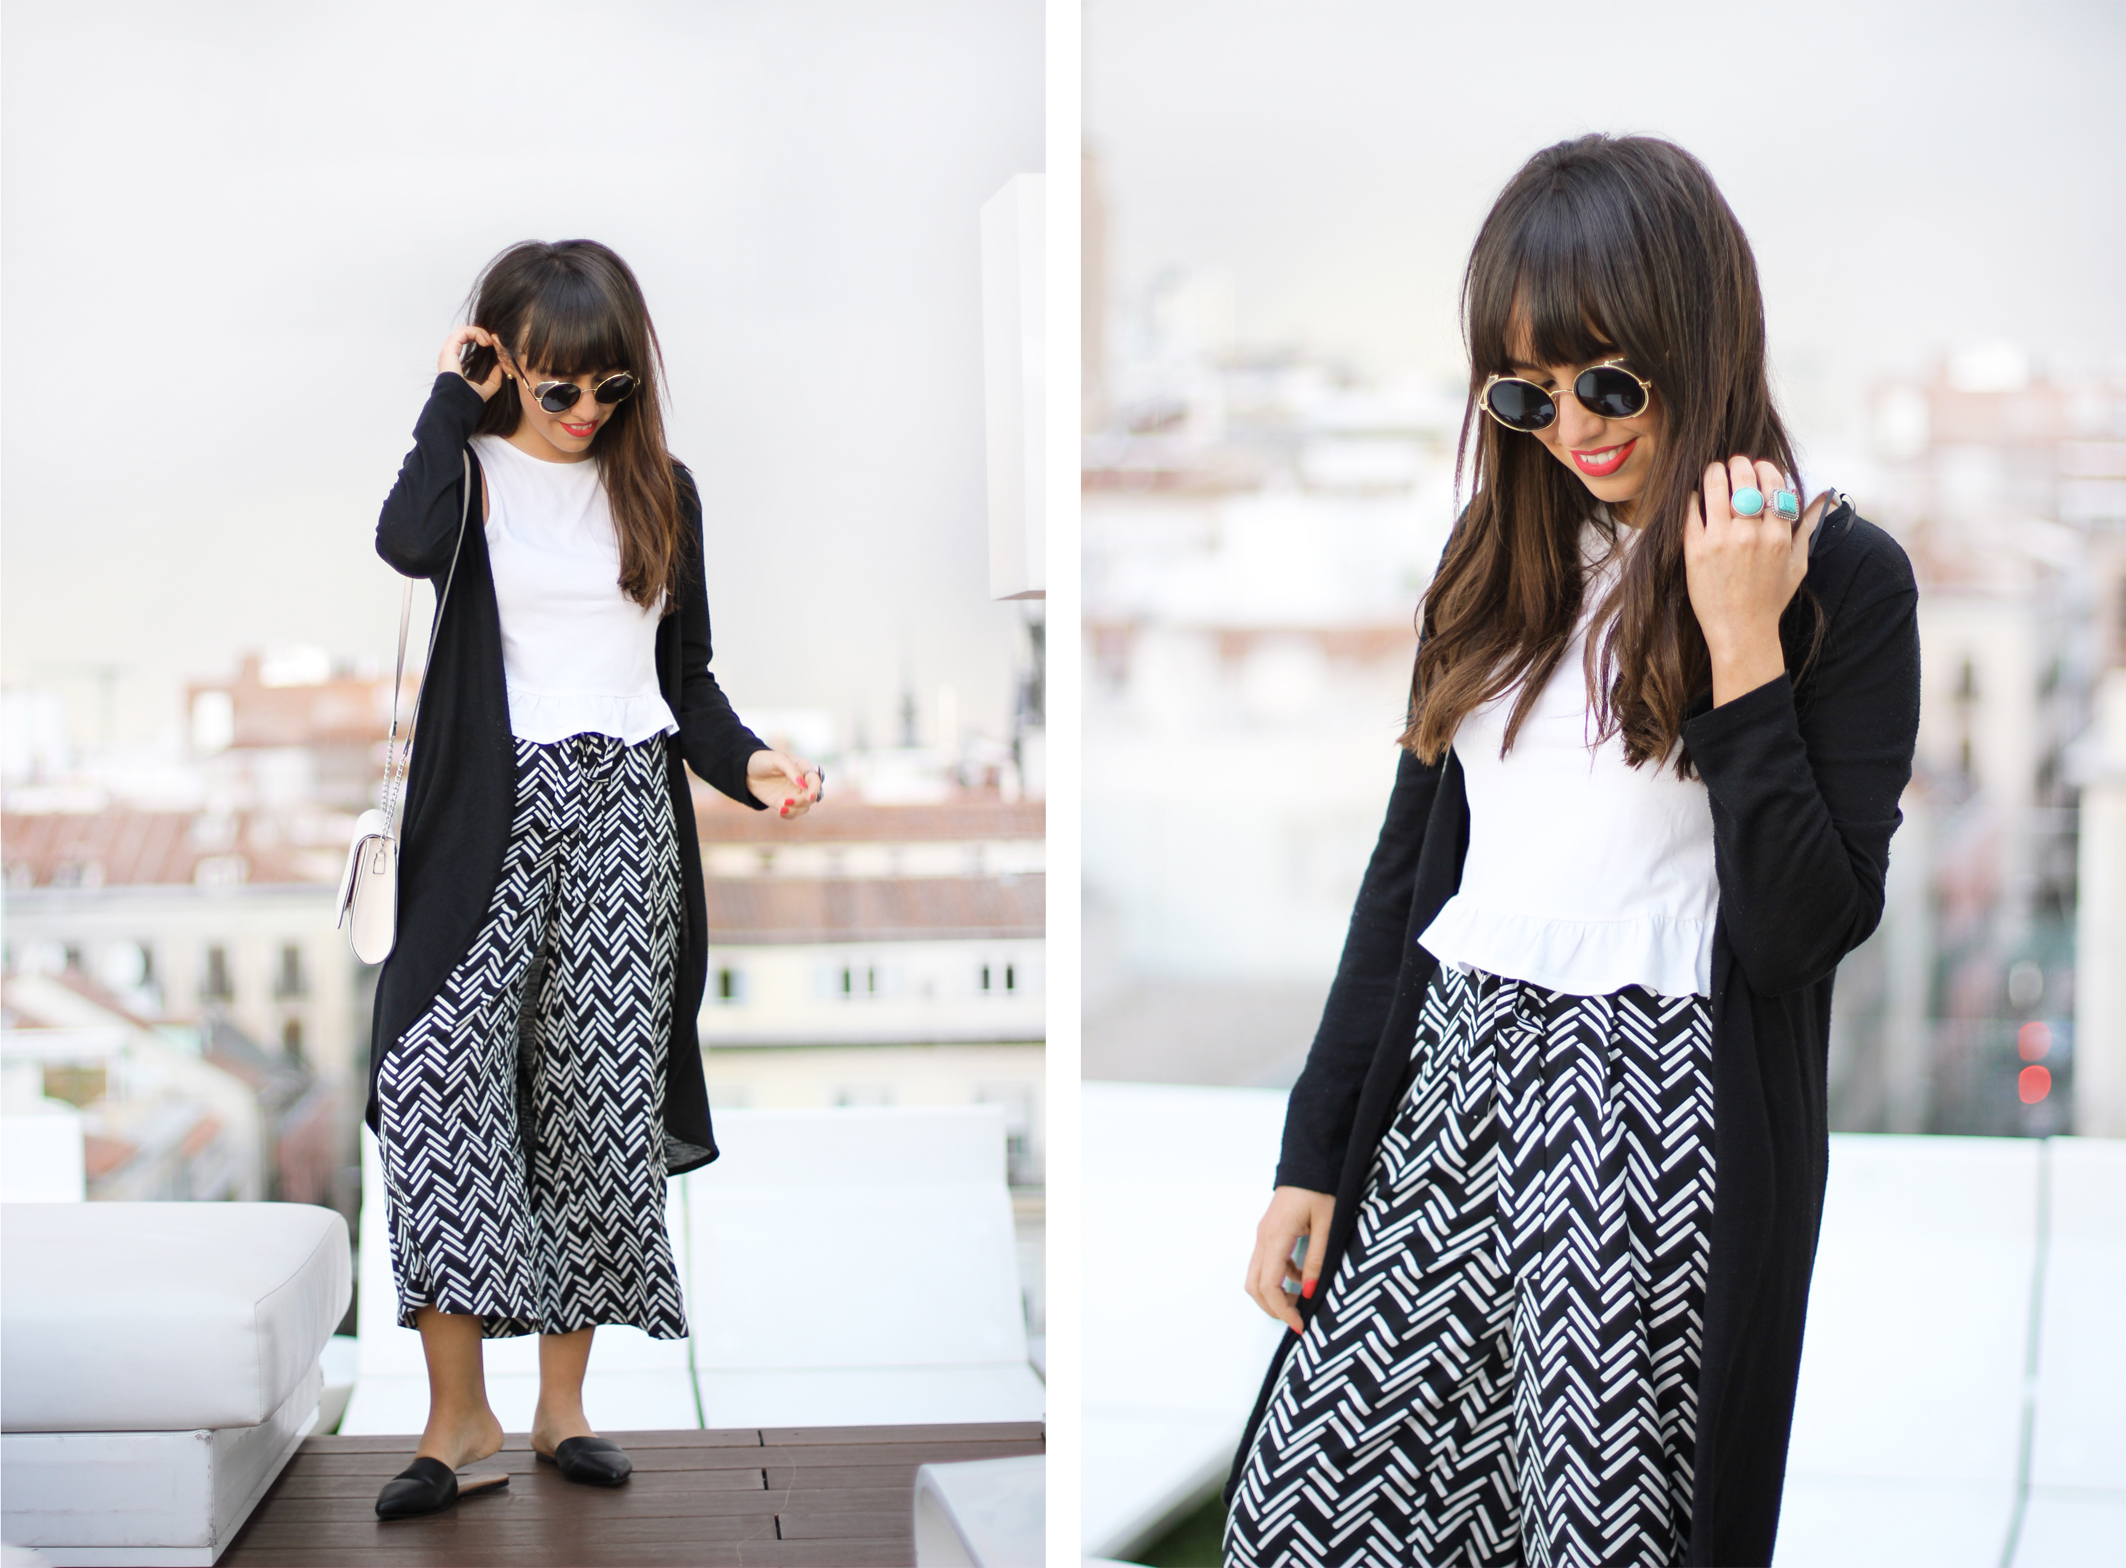 Street style, ethnic culotte pants, long jacket, summer outfit